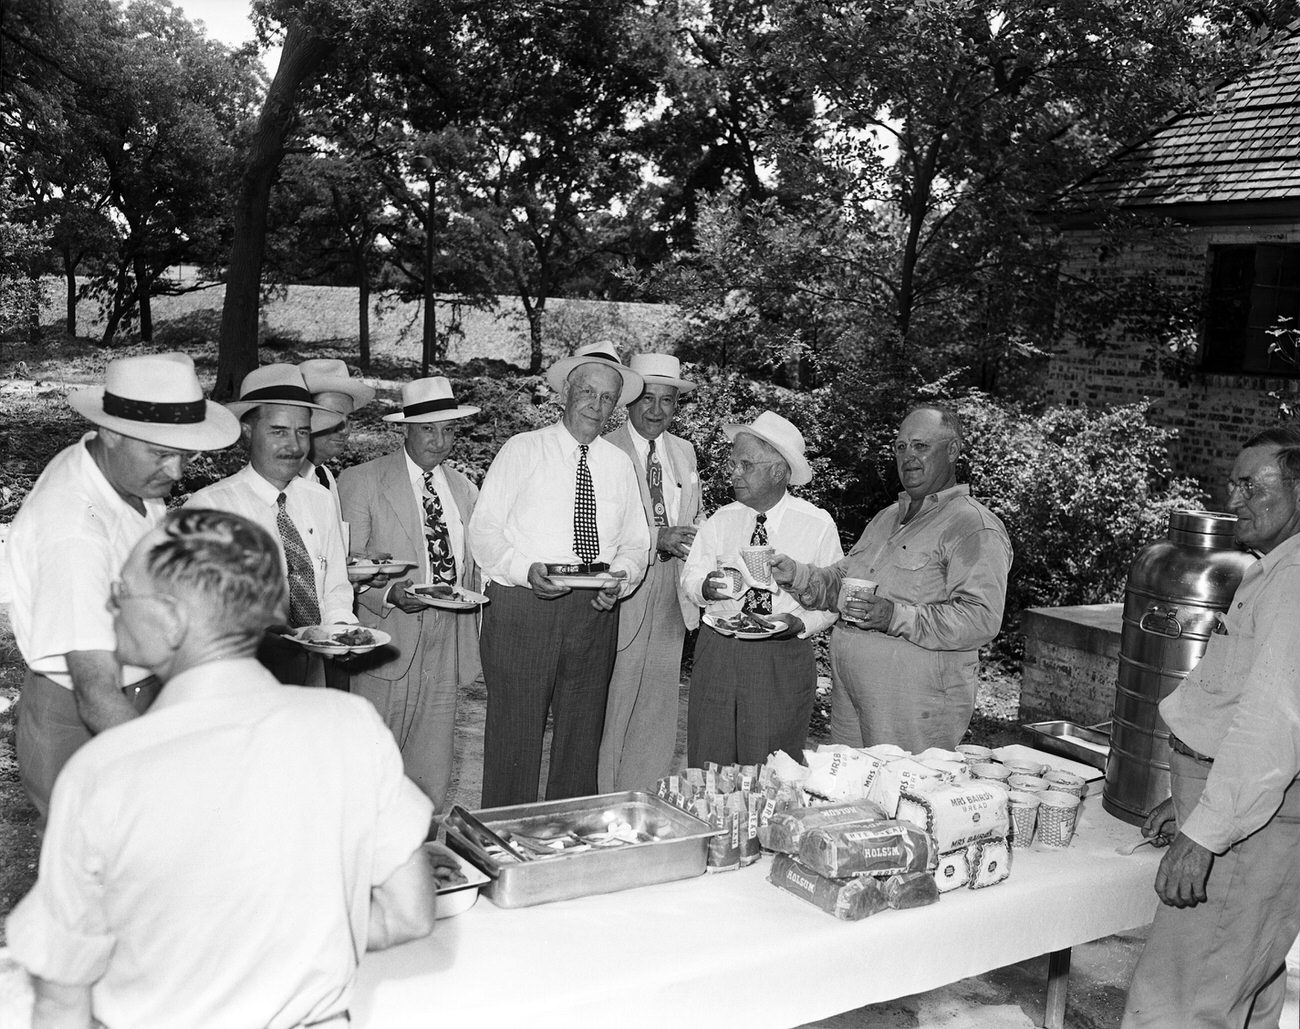 Citizens Flood Control Committee men, along with city and county officials. Amon Carter Sr. and group gathered around a picnic table.